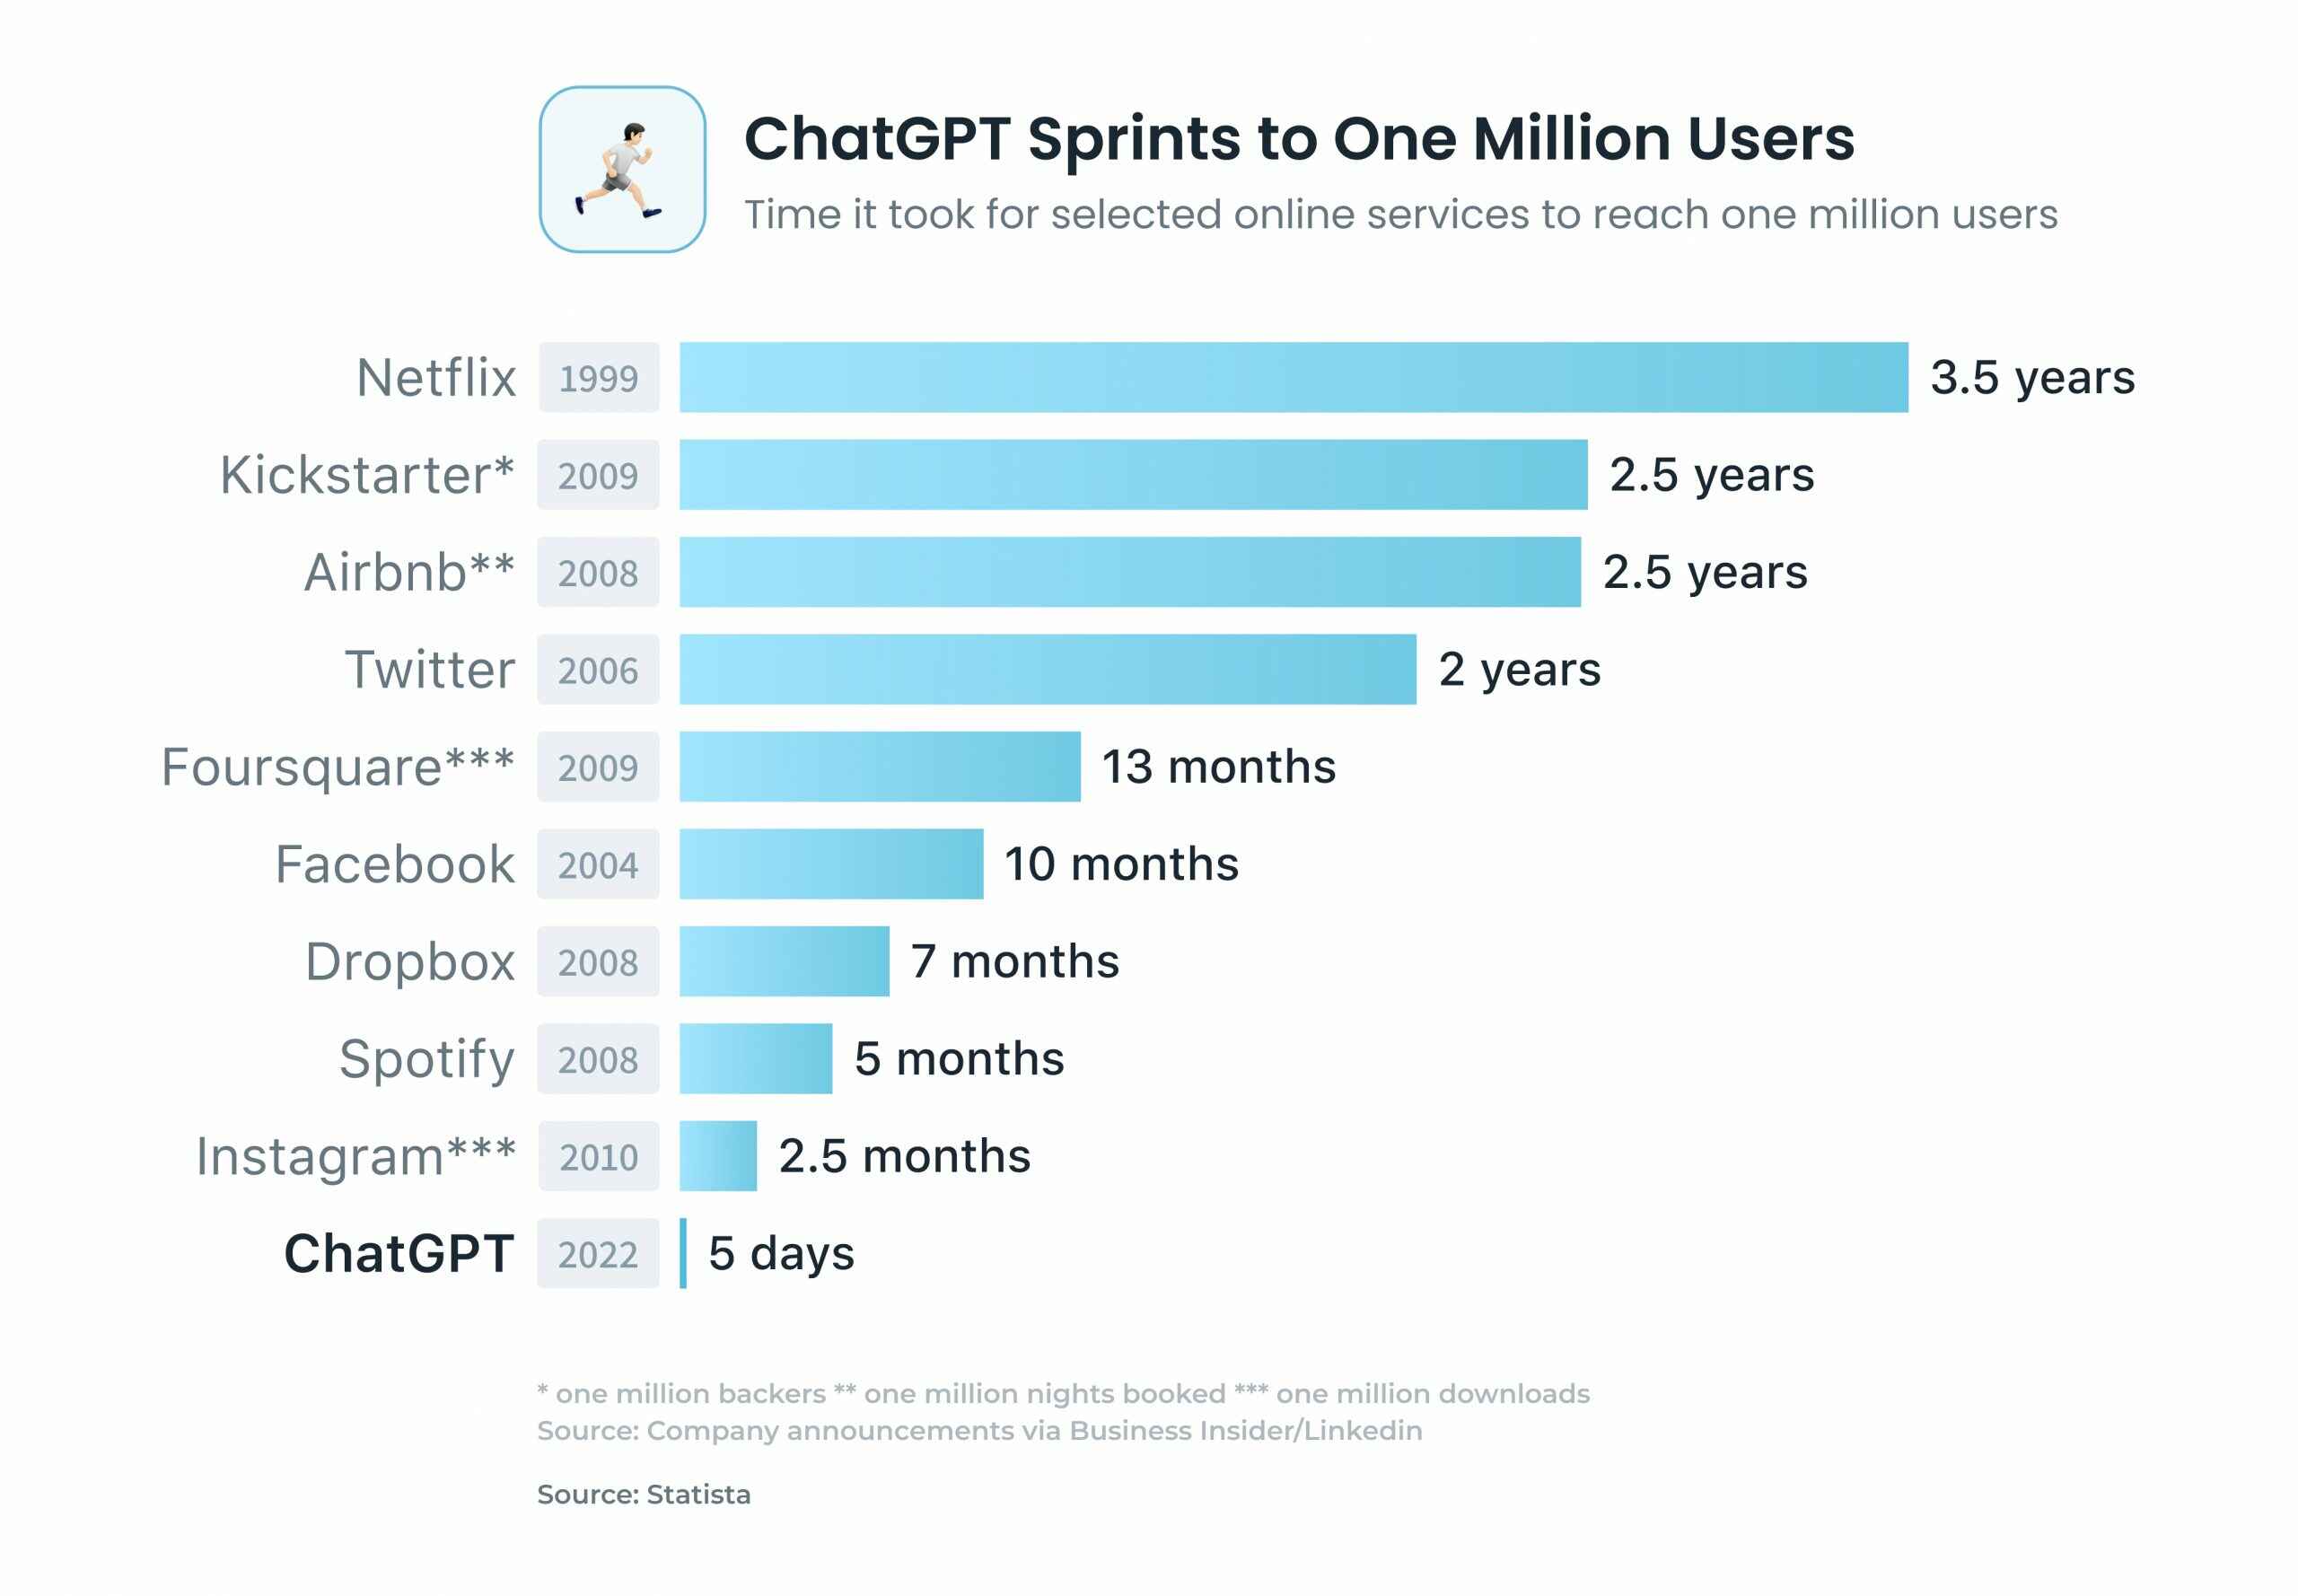 ChatGPT receives 1 million users in 5 days